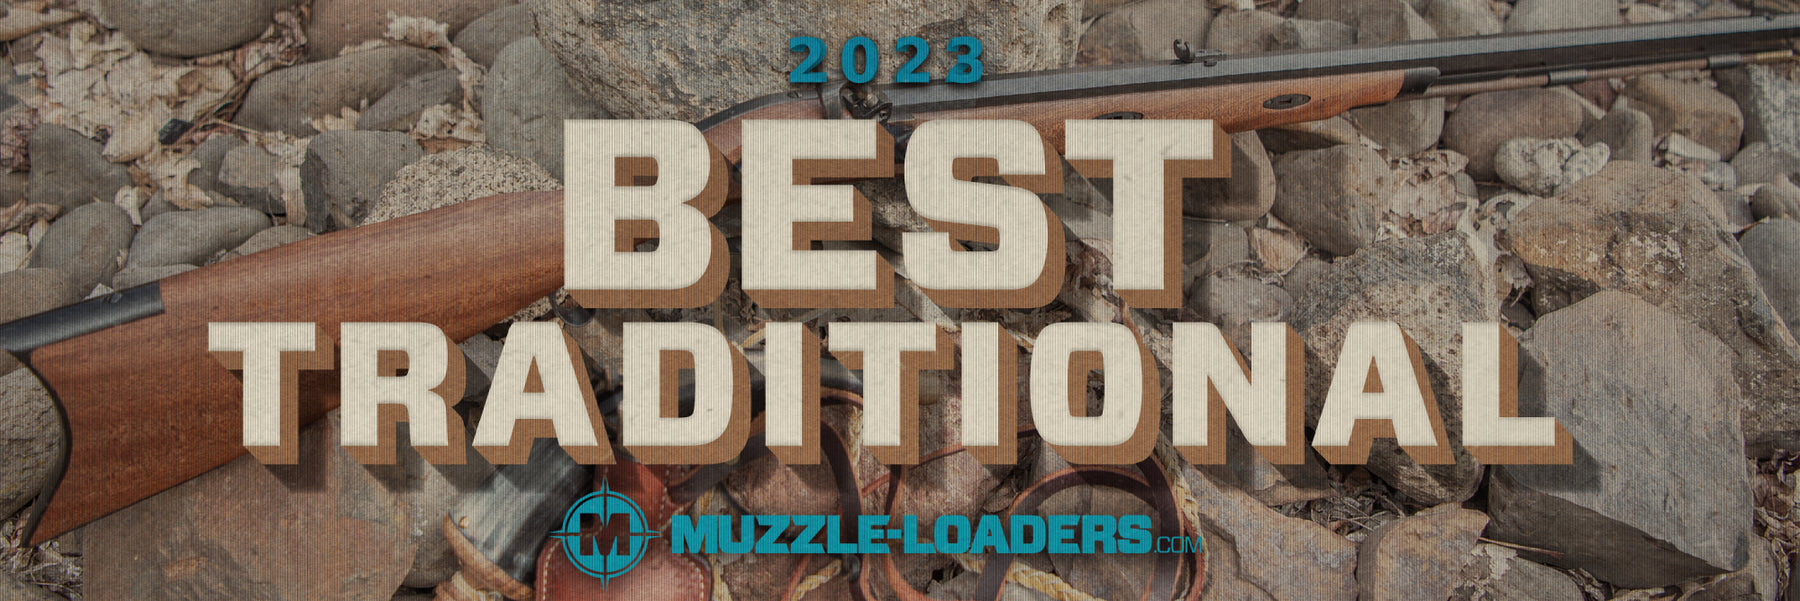 Best Traditional Muzzleloaders for 2023